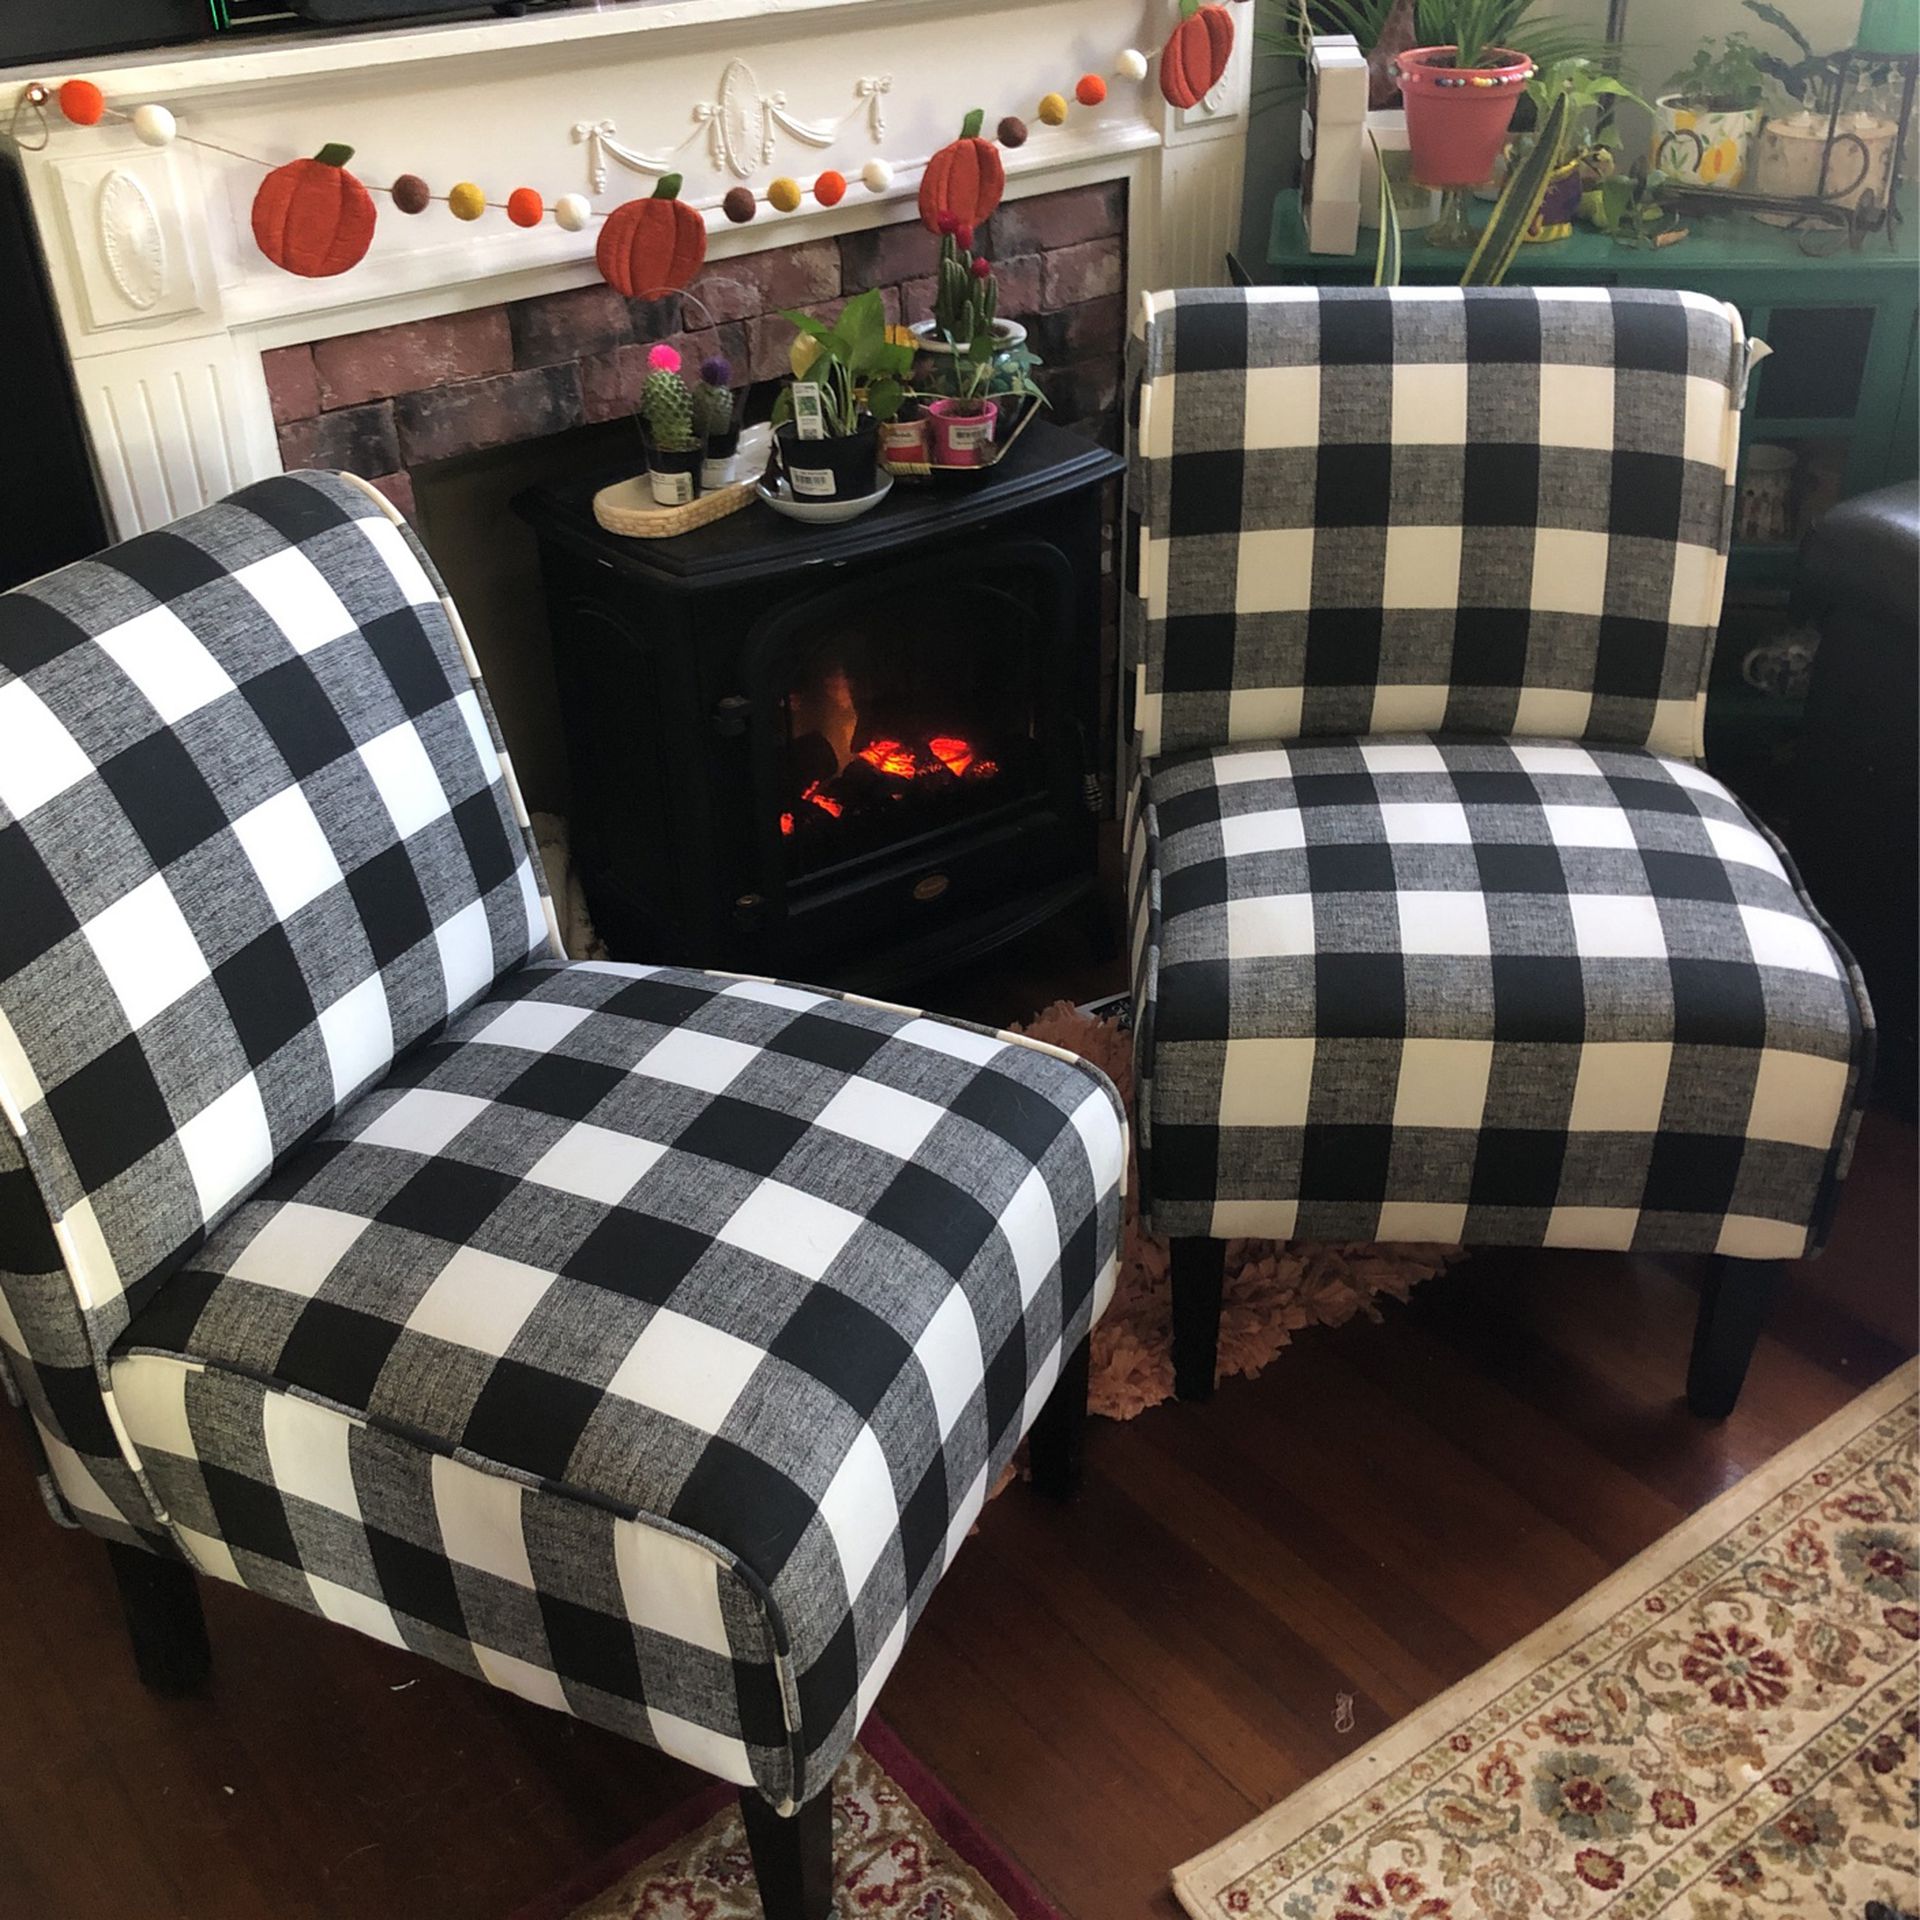 Cozy Chairs Never Used $100. For Both